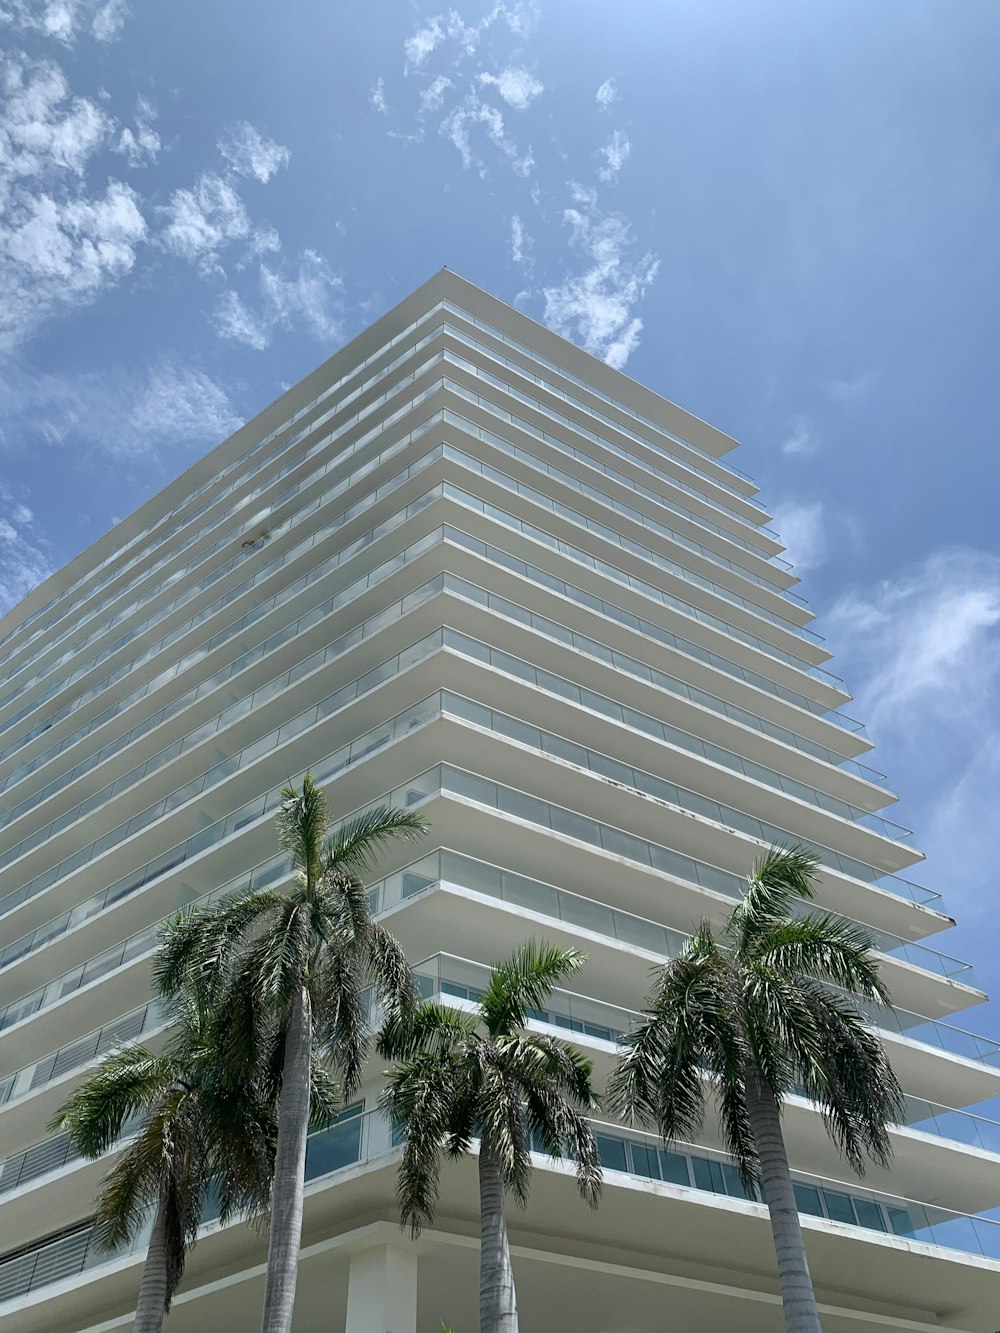 a tall building with palm trees in front of it